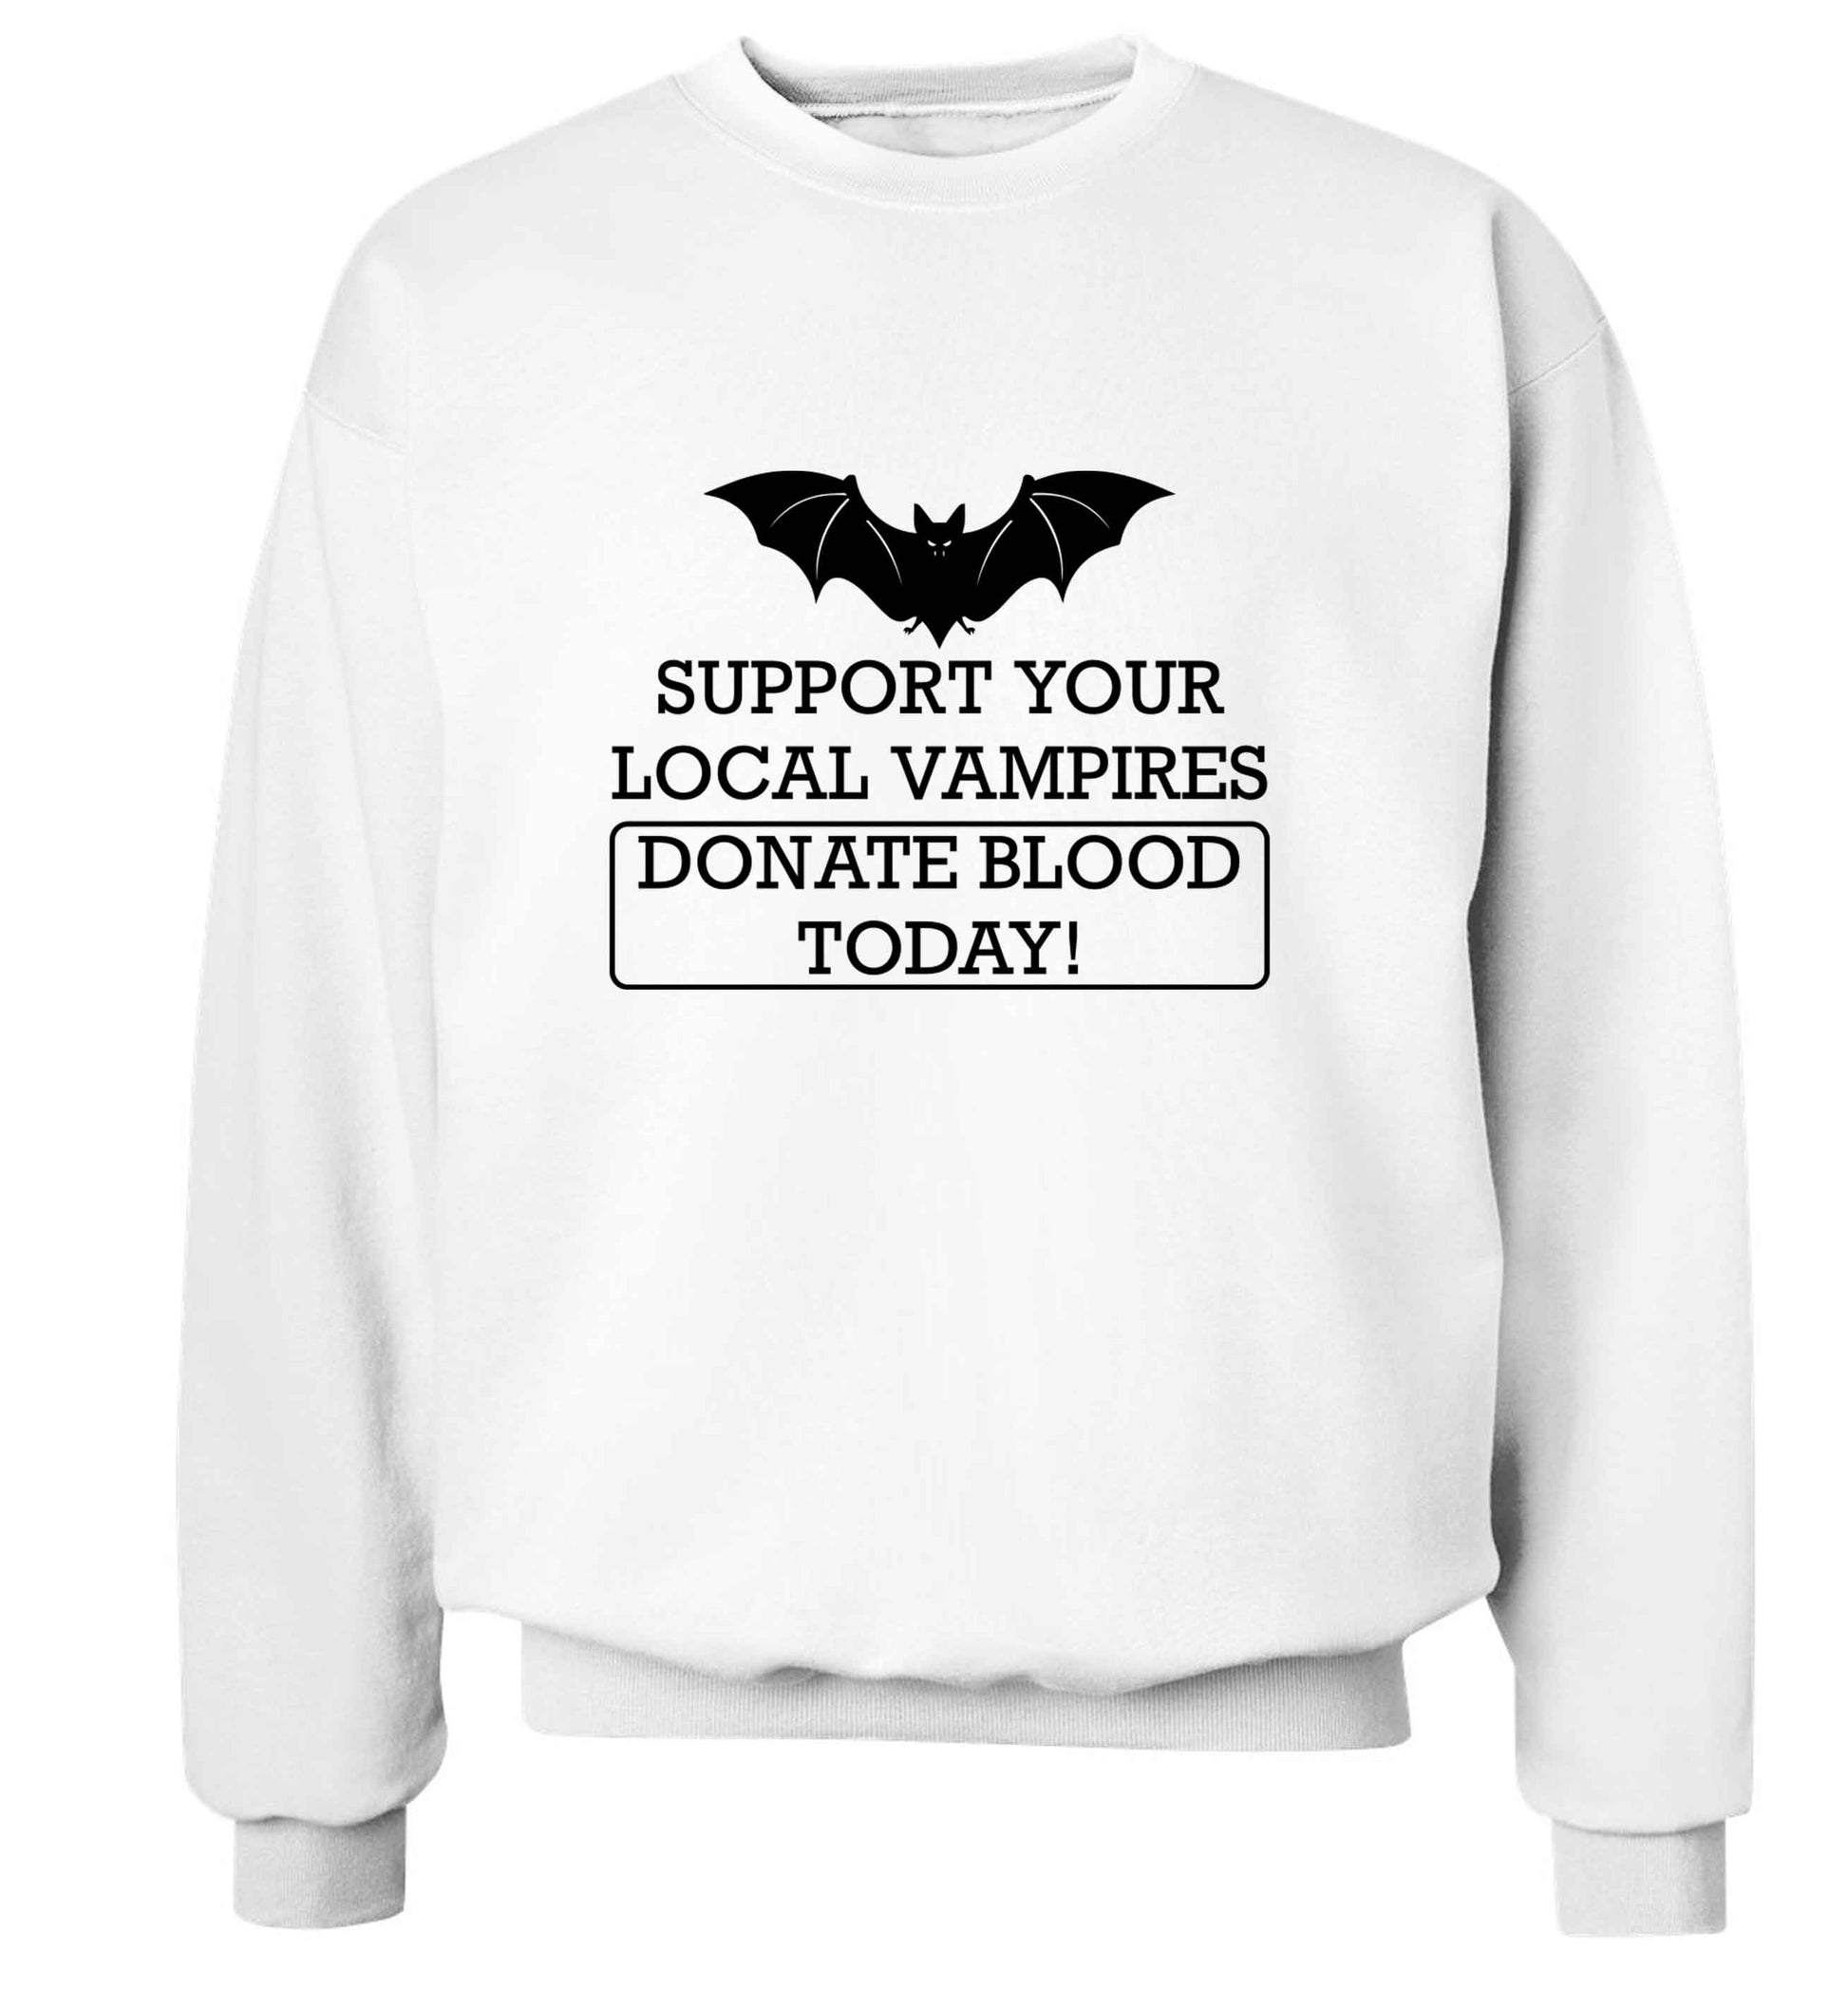 Support your local vampires donate blood today! adult's unisex white sweater 2XL